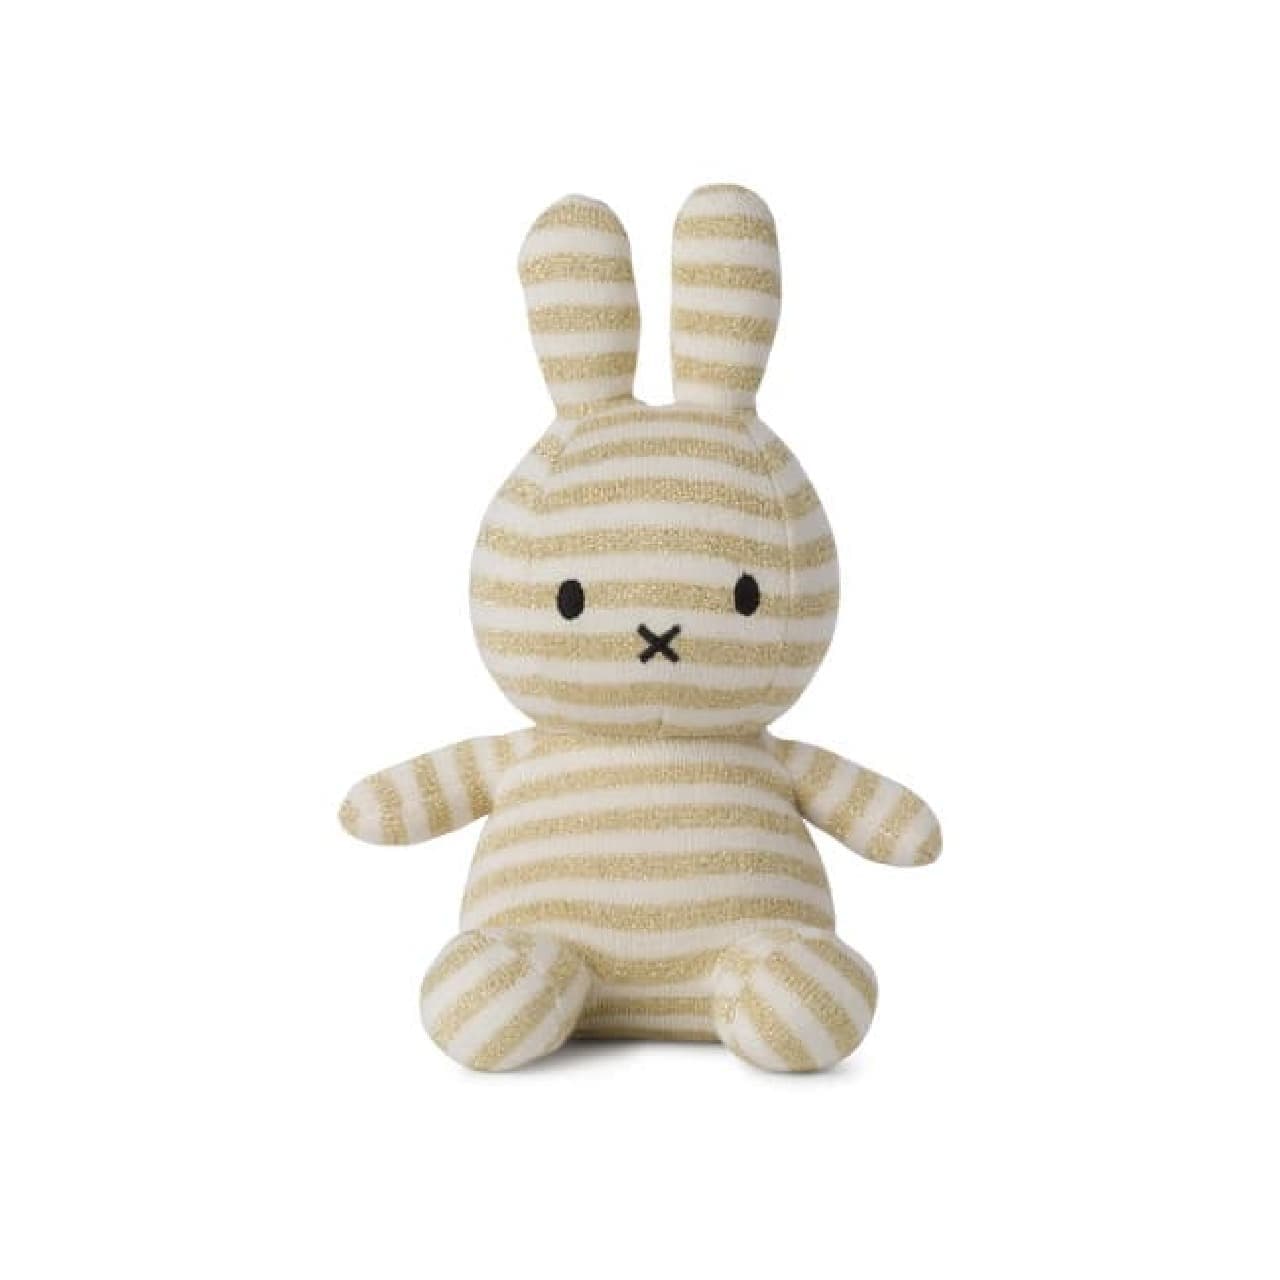 Miffy plush toys made from organic cotton --From "BON TON TOYS" from the Netherlands! Smooth to the touch